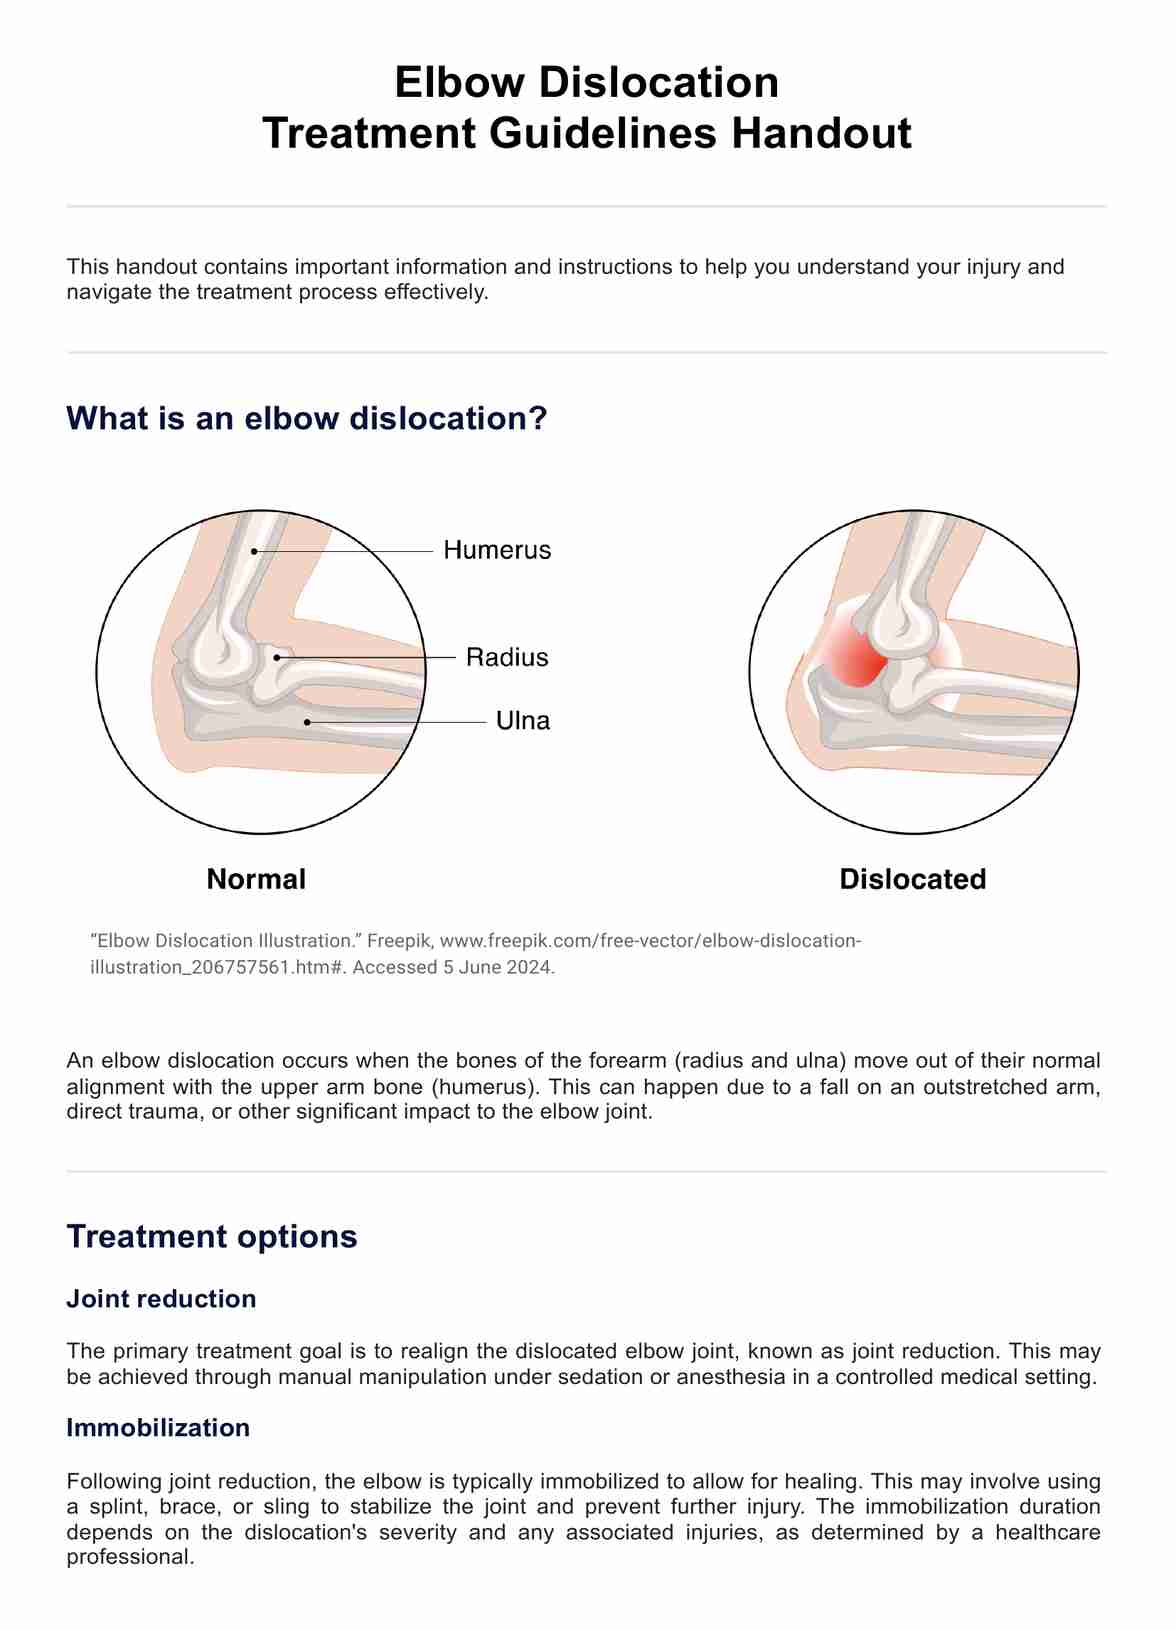 Elbow Dislocation Treatment Guidelines Handout PDF Example